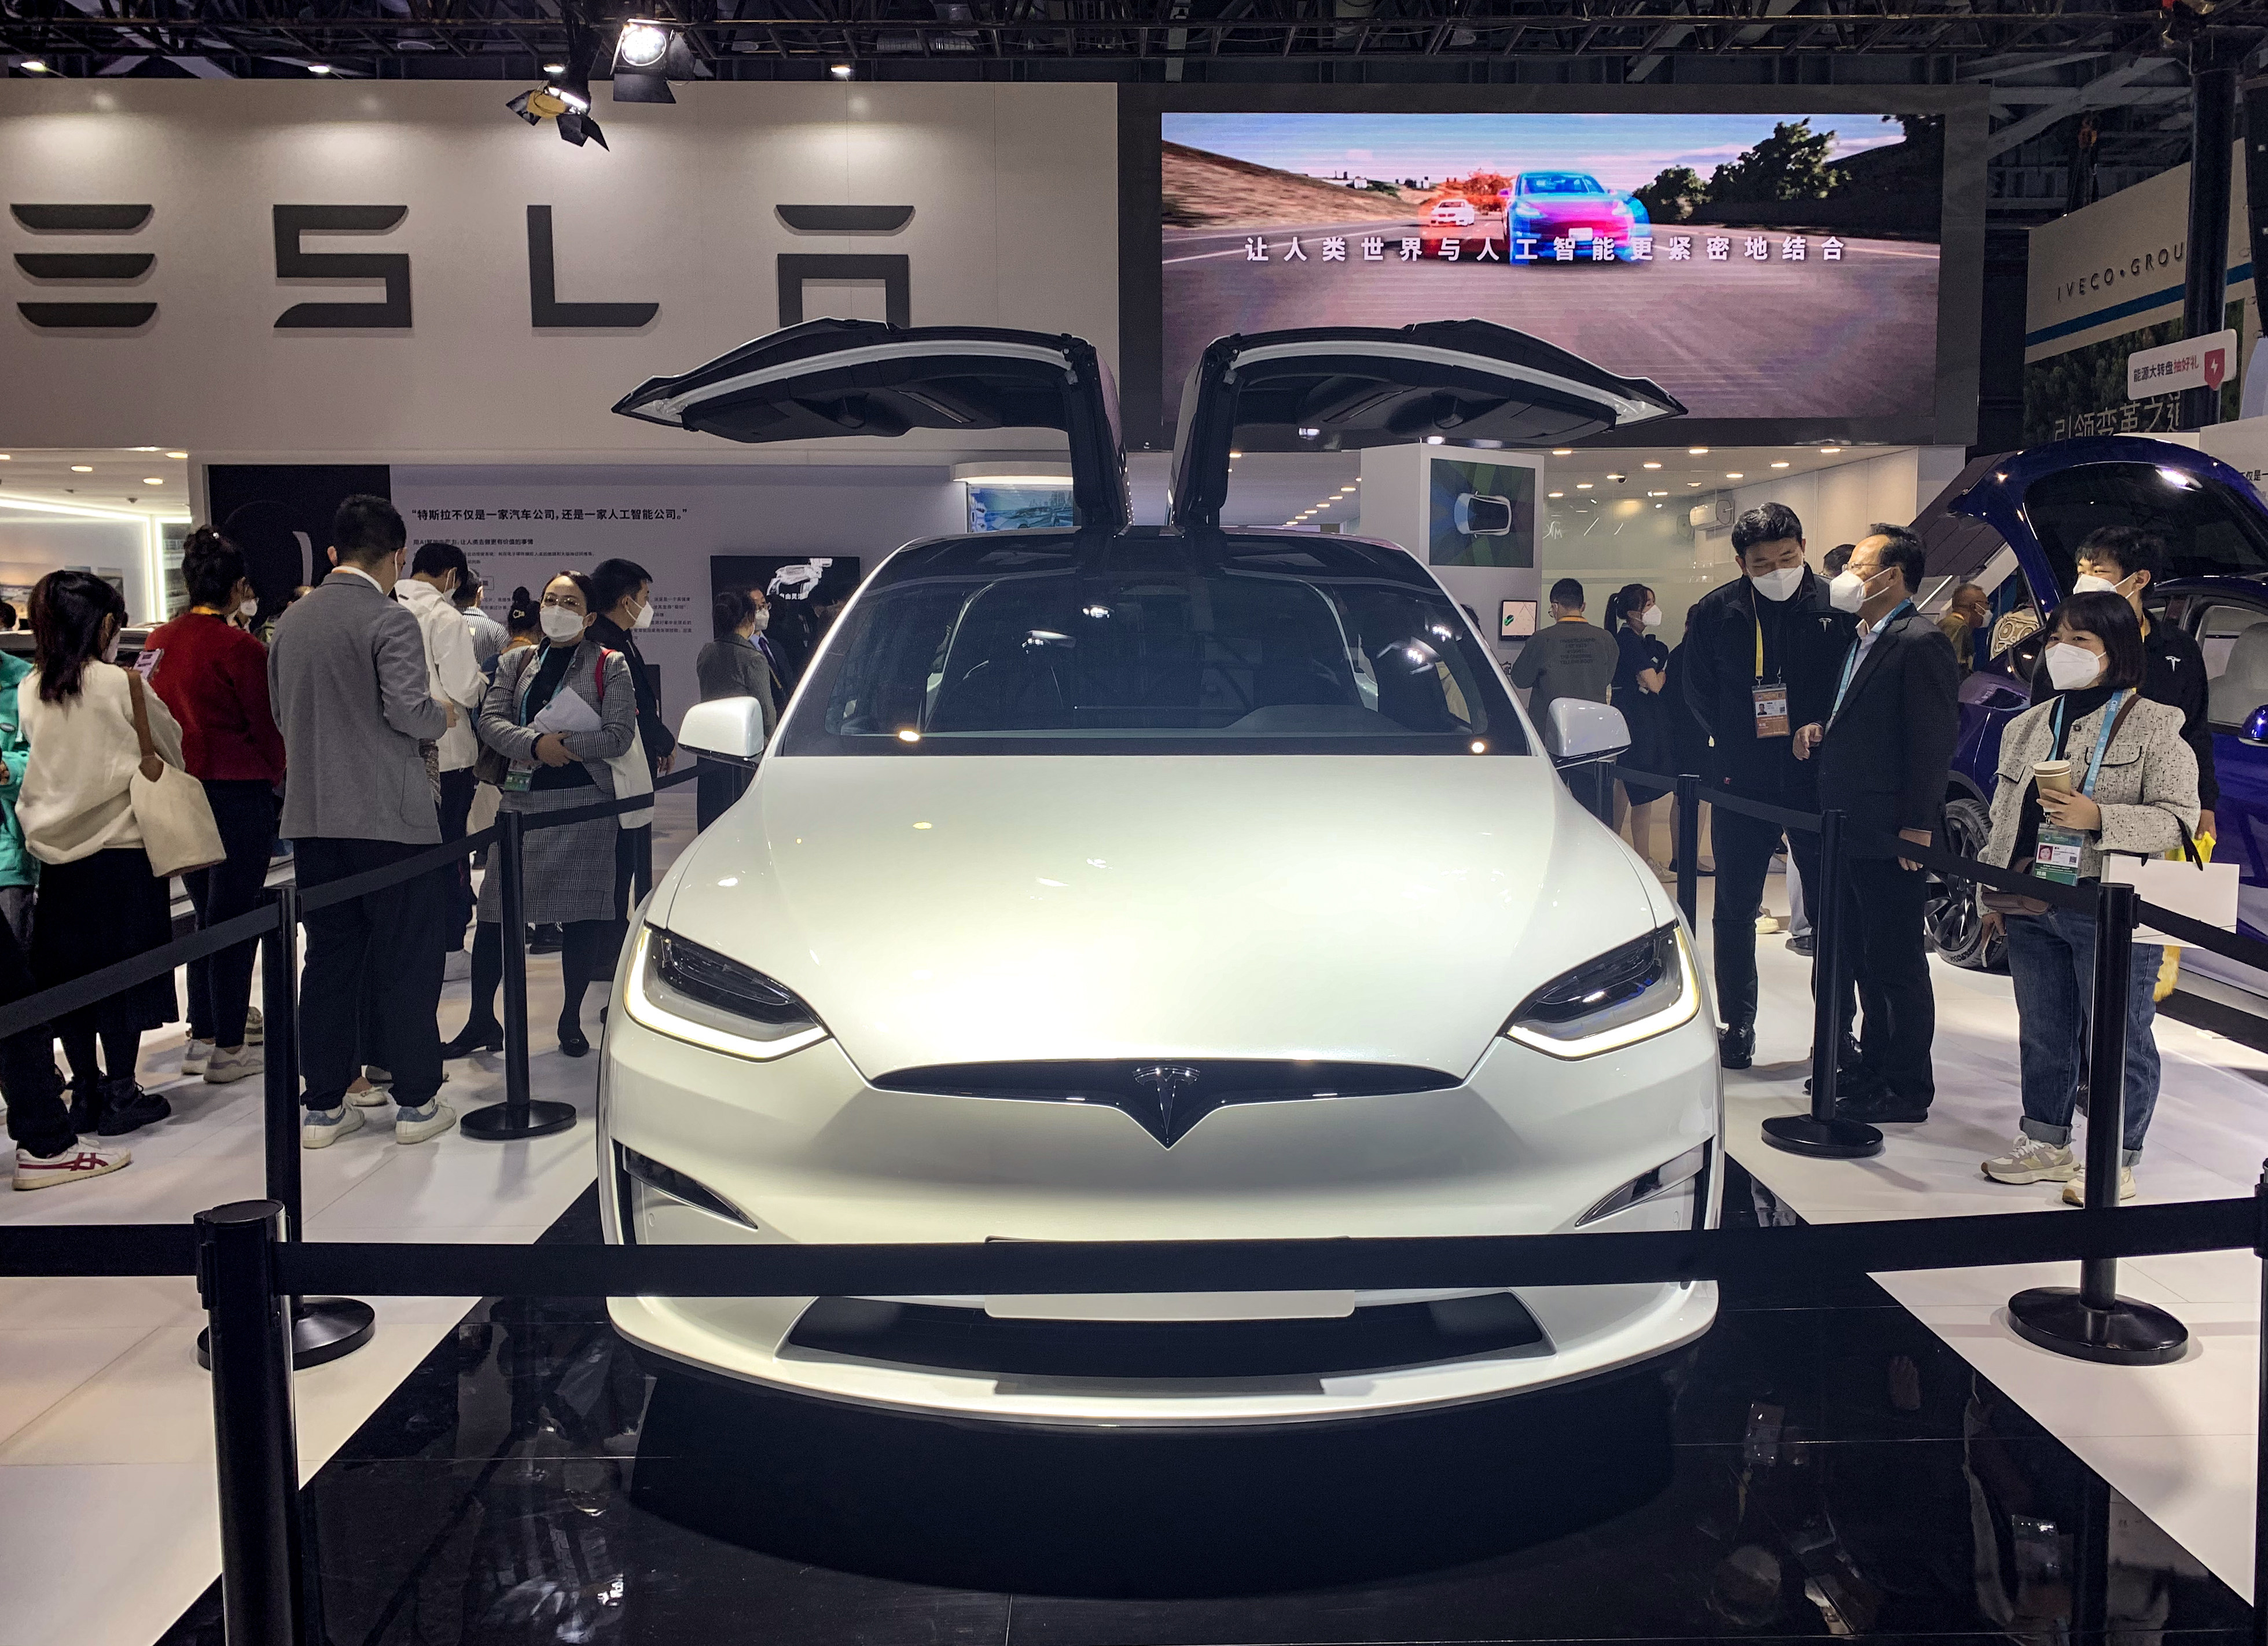 Tesla’s US-made Model S Plaid on display at the China International Import Expo in Shanghai in 2022. Photo: Daniel Ren